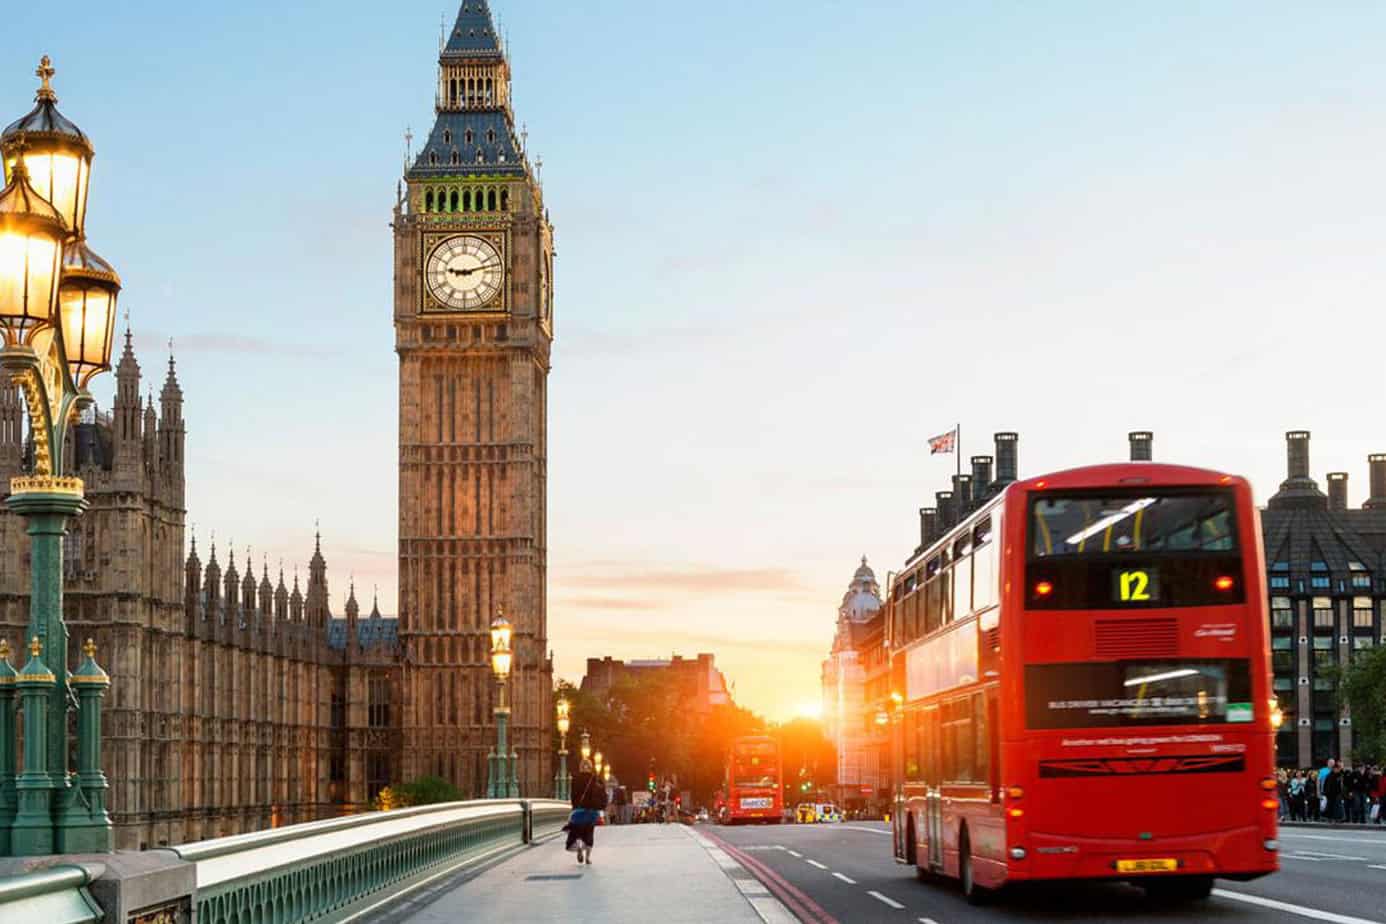 How to Plan the Best Trip to London